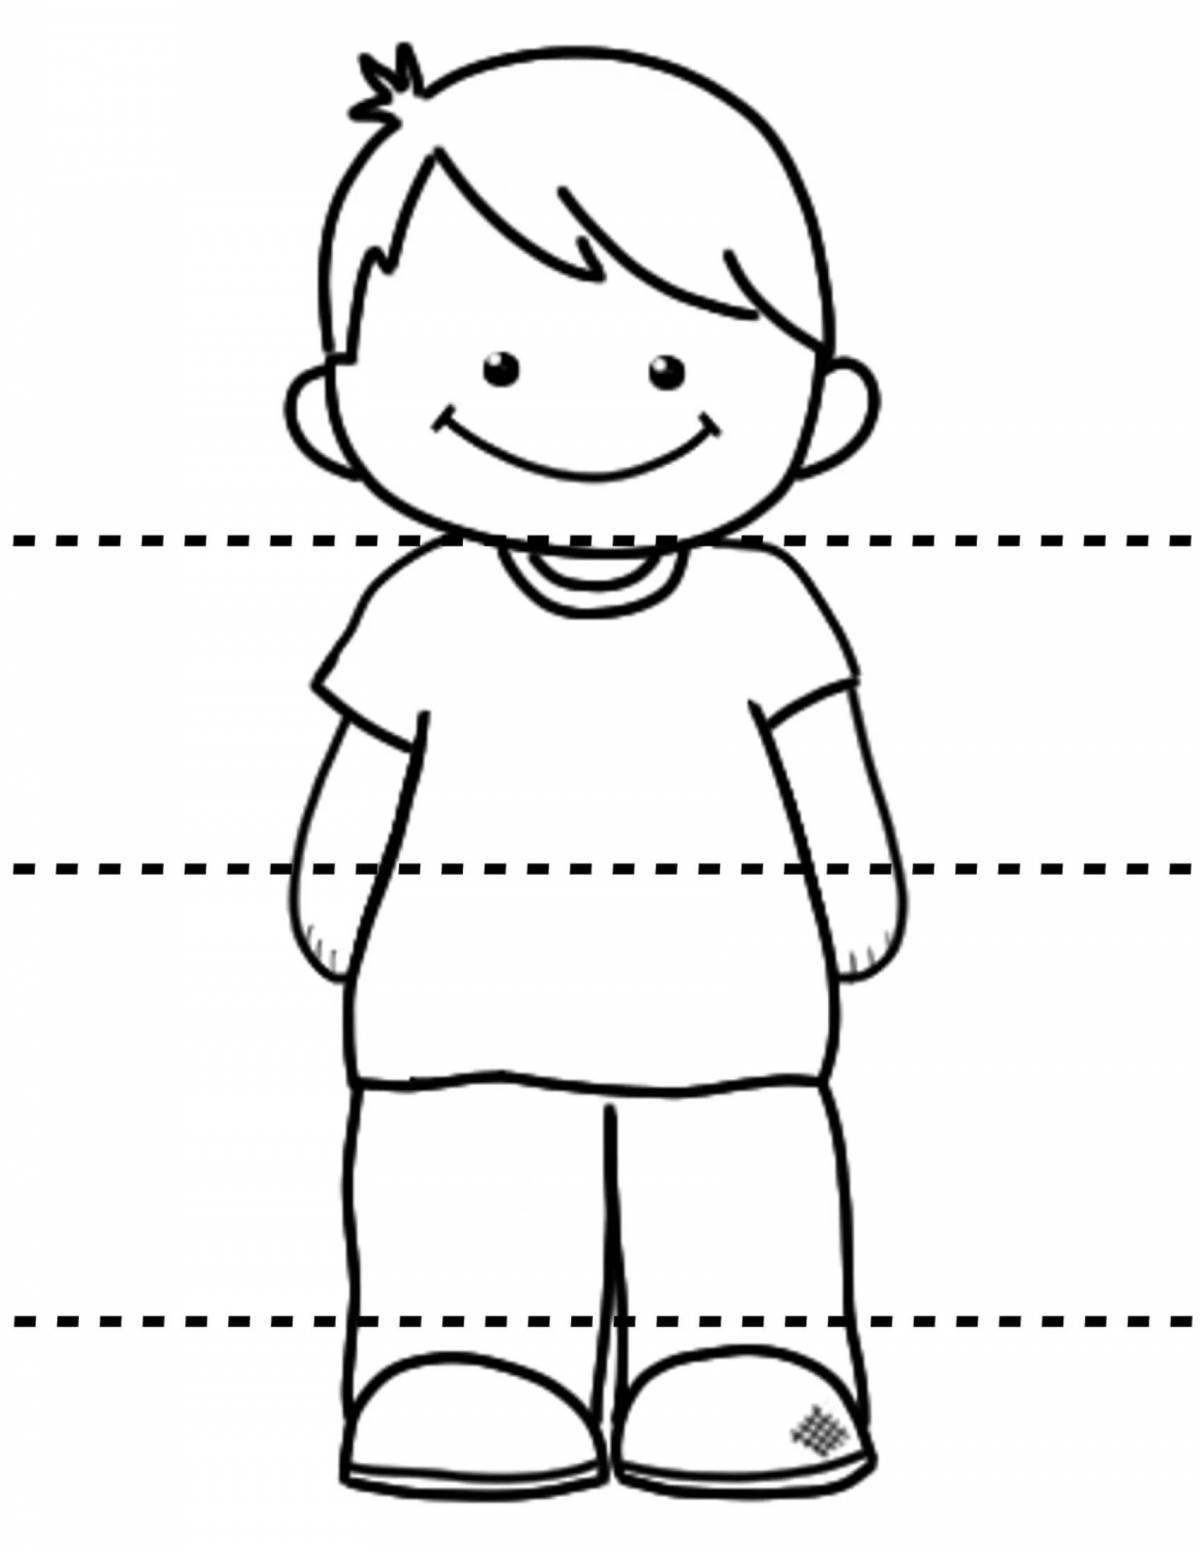 Gorgeous people preschool coloring pages